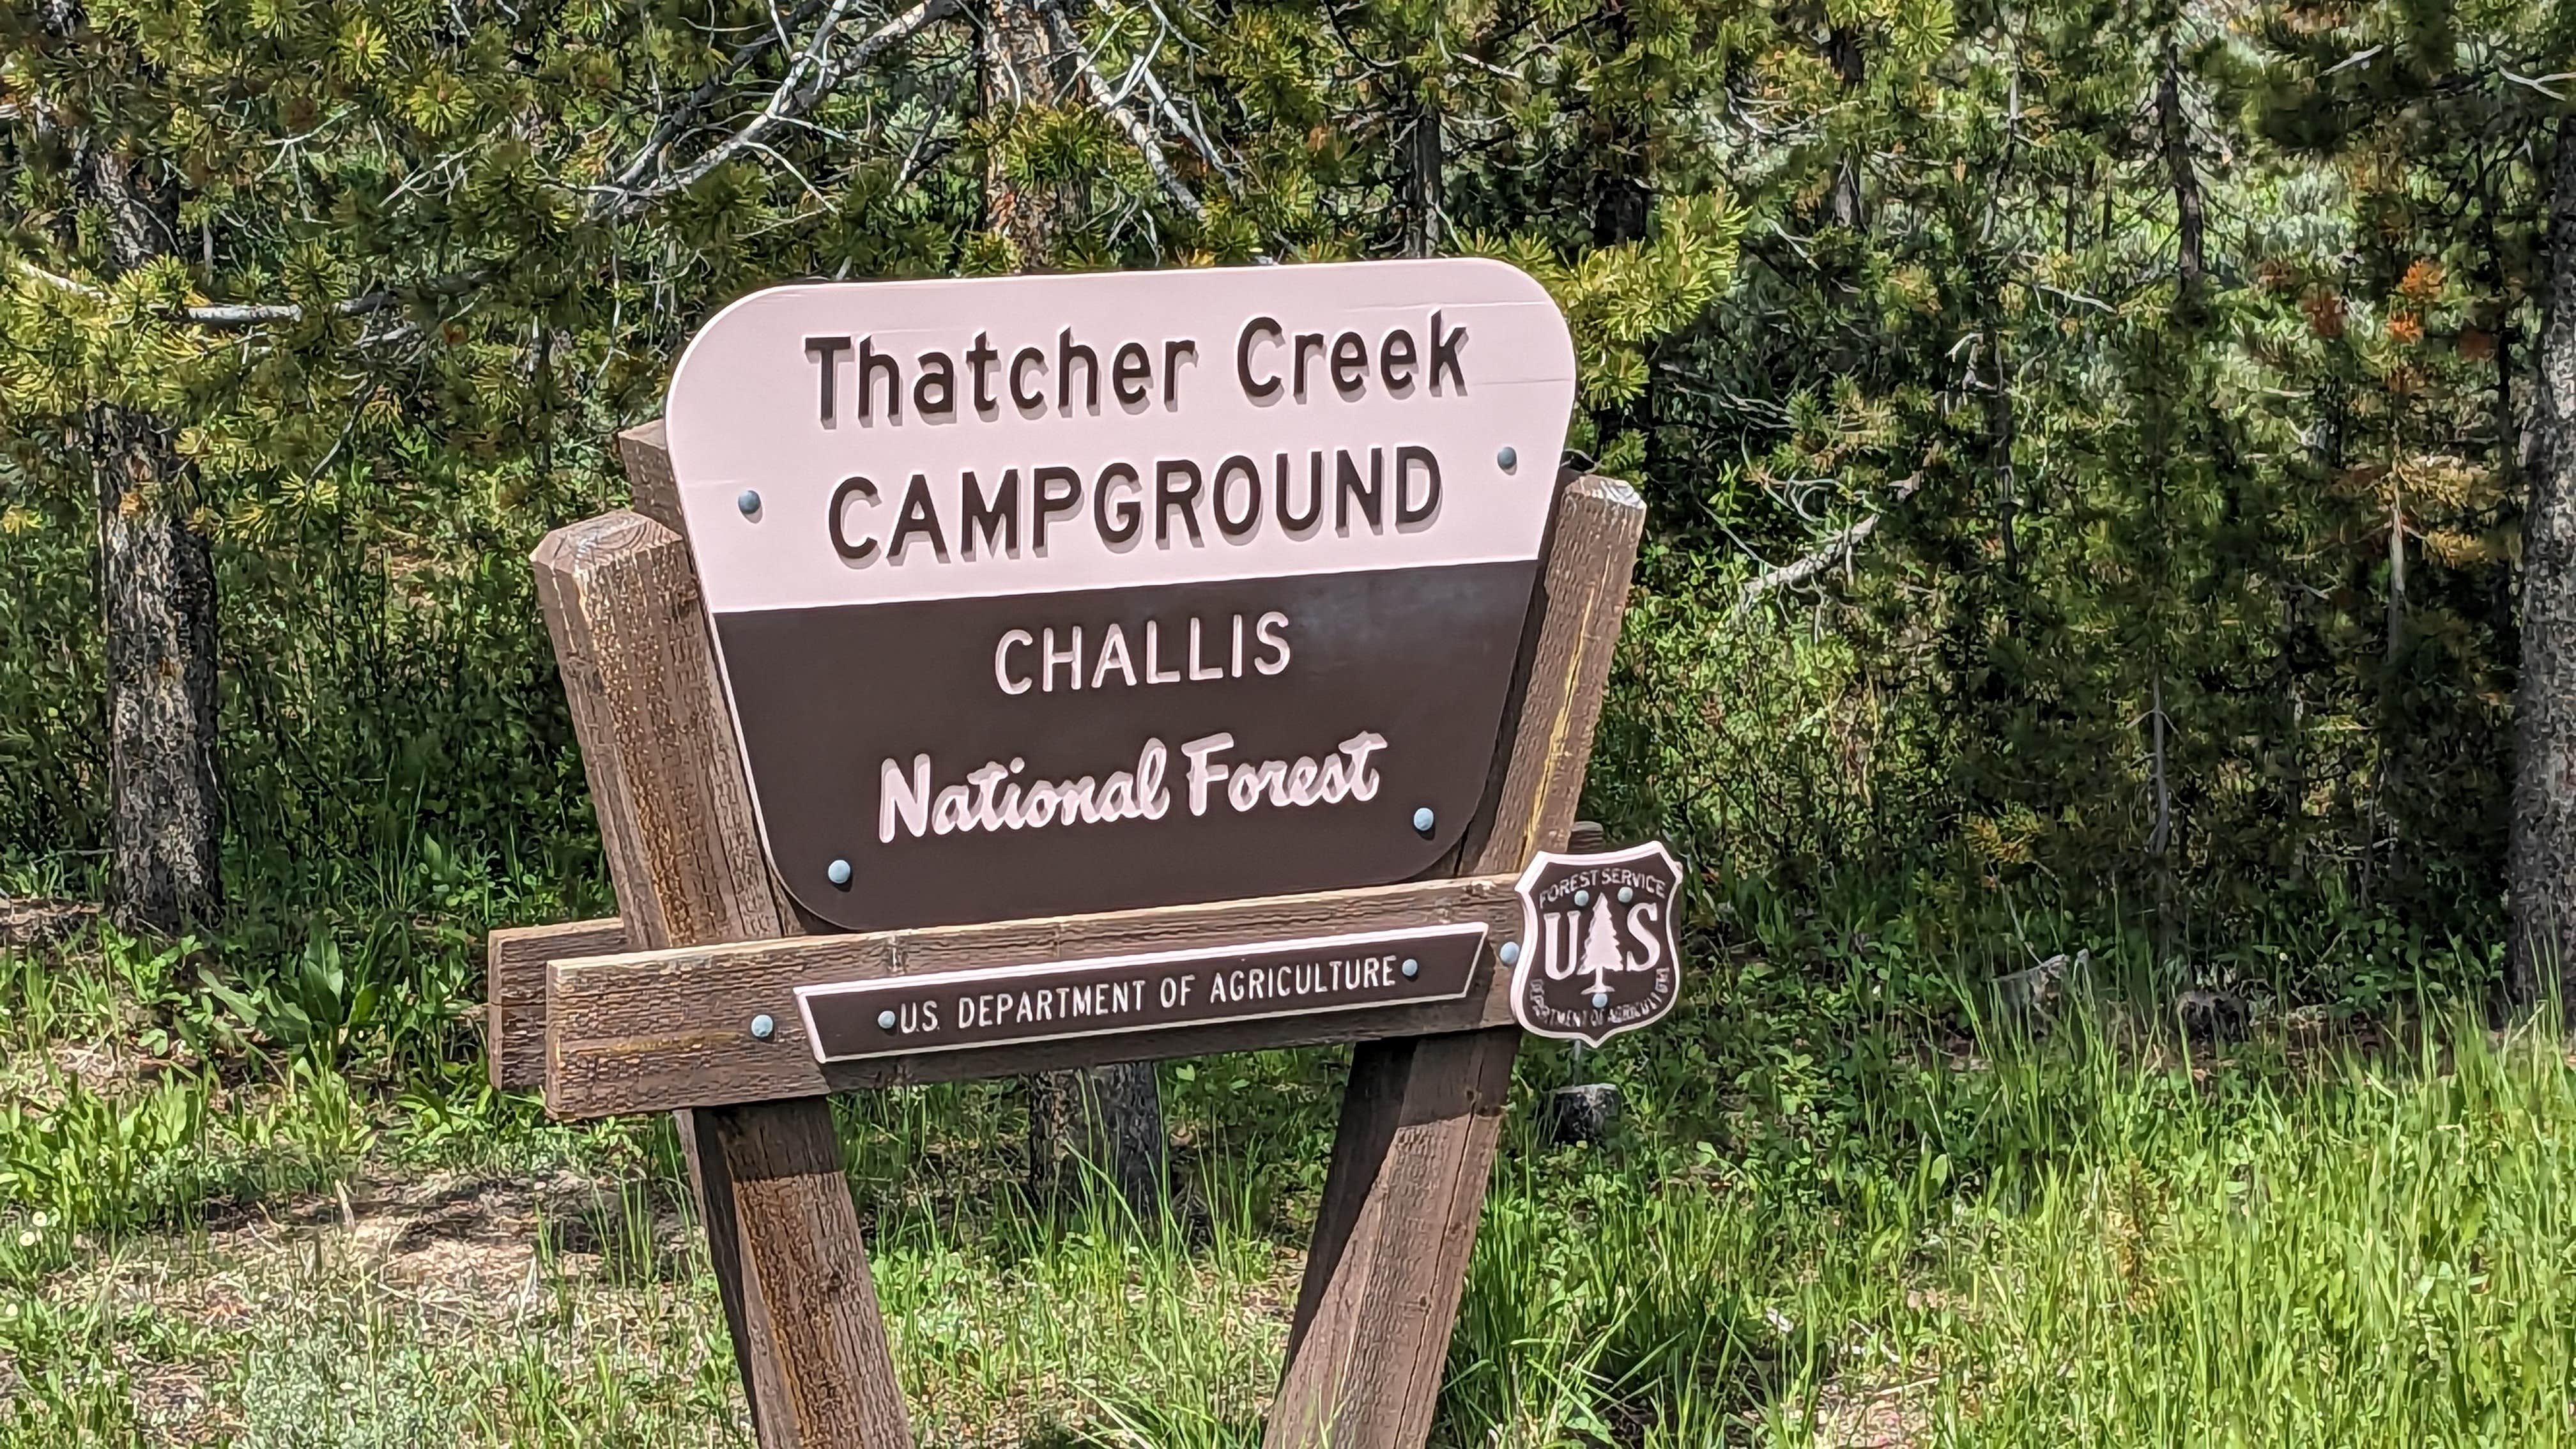 Camper submitted image from Thatcher Creek Campground - 3